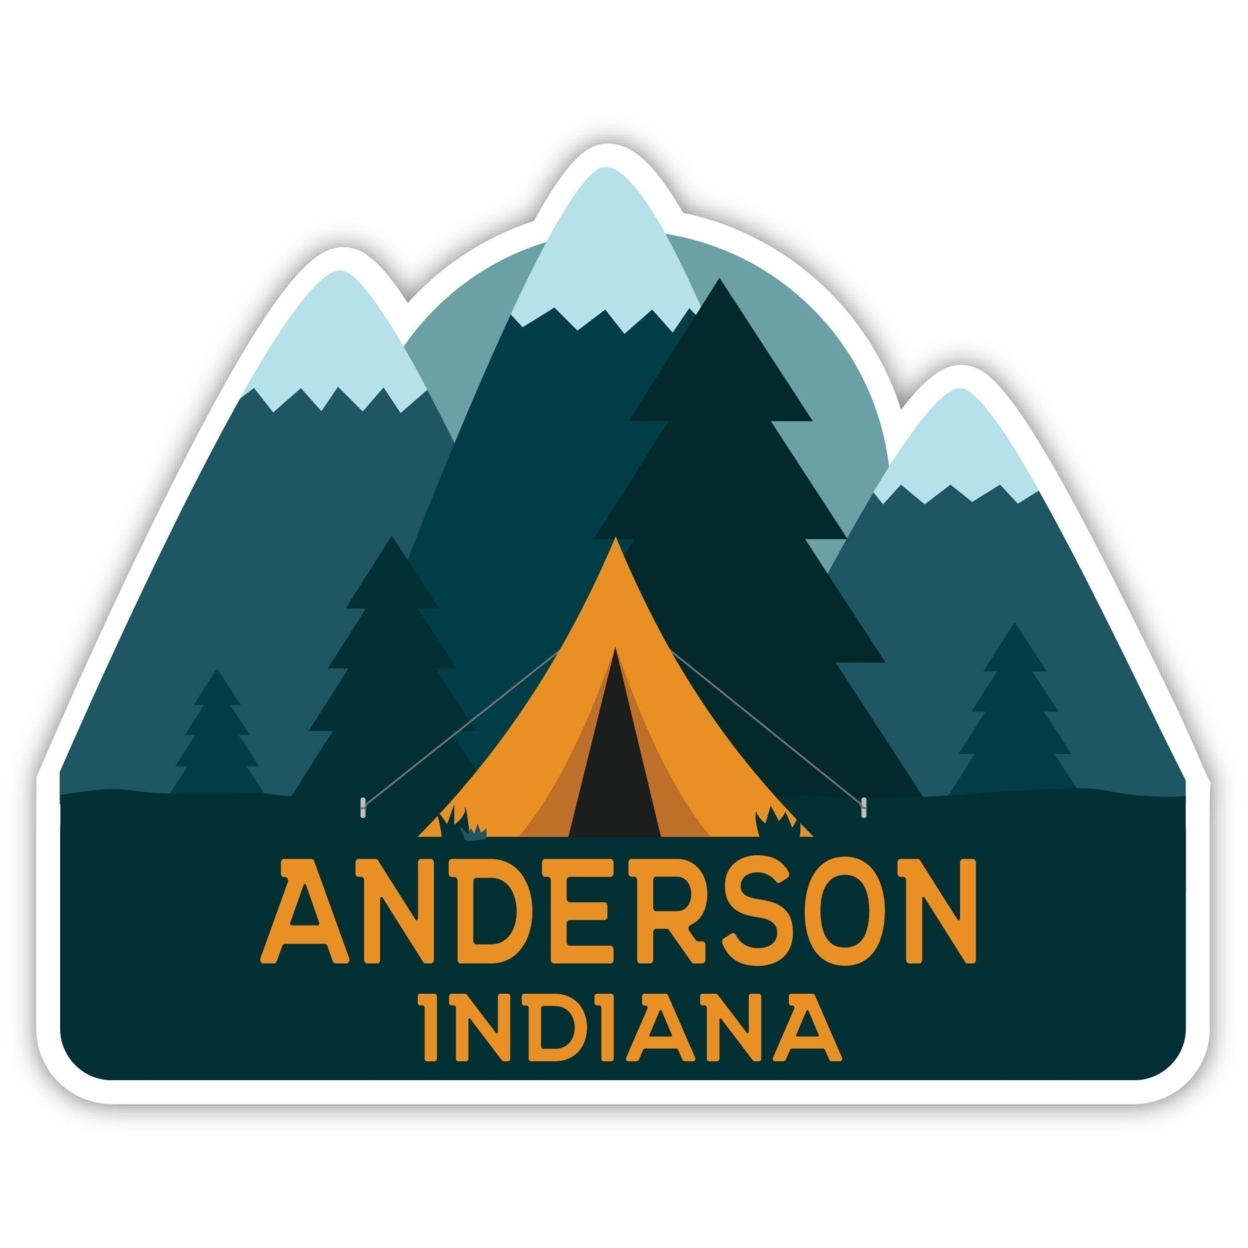 Anderson Indiana Souvenir Decorative Stickers (Choose Theme And Size) - 4-Pack, 8-Inch, Tent